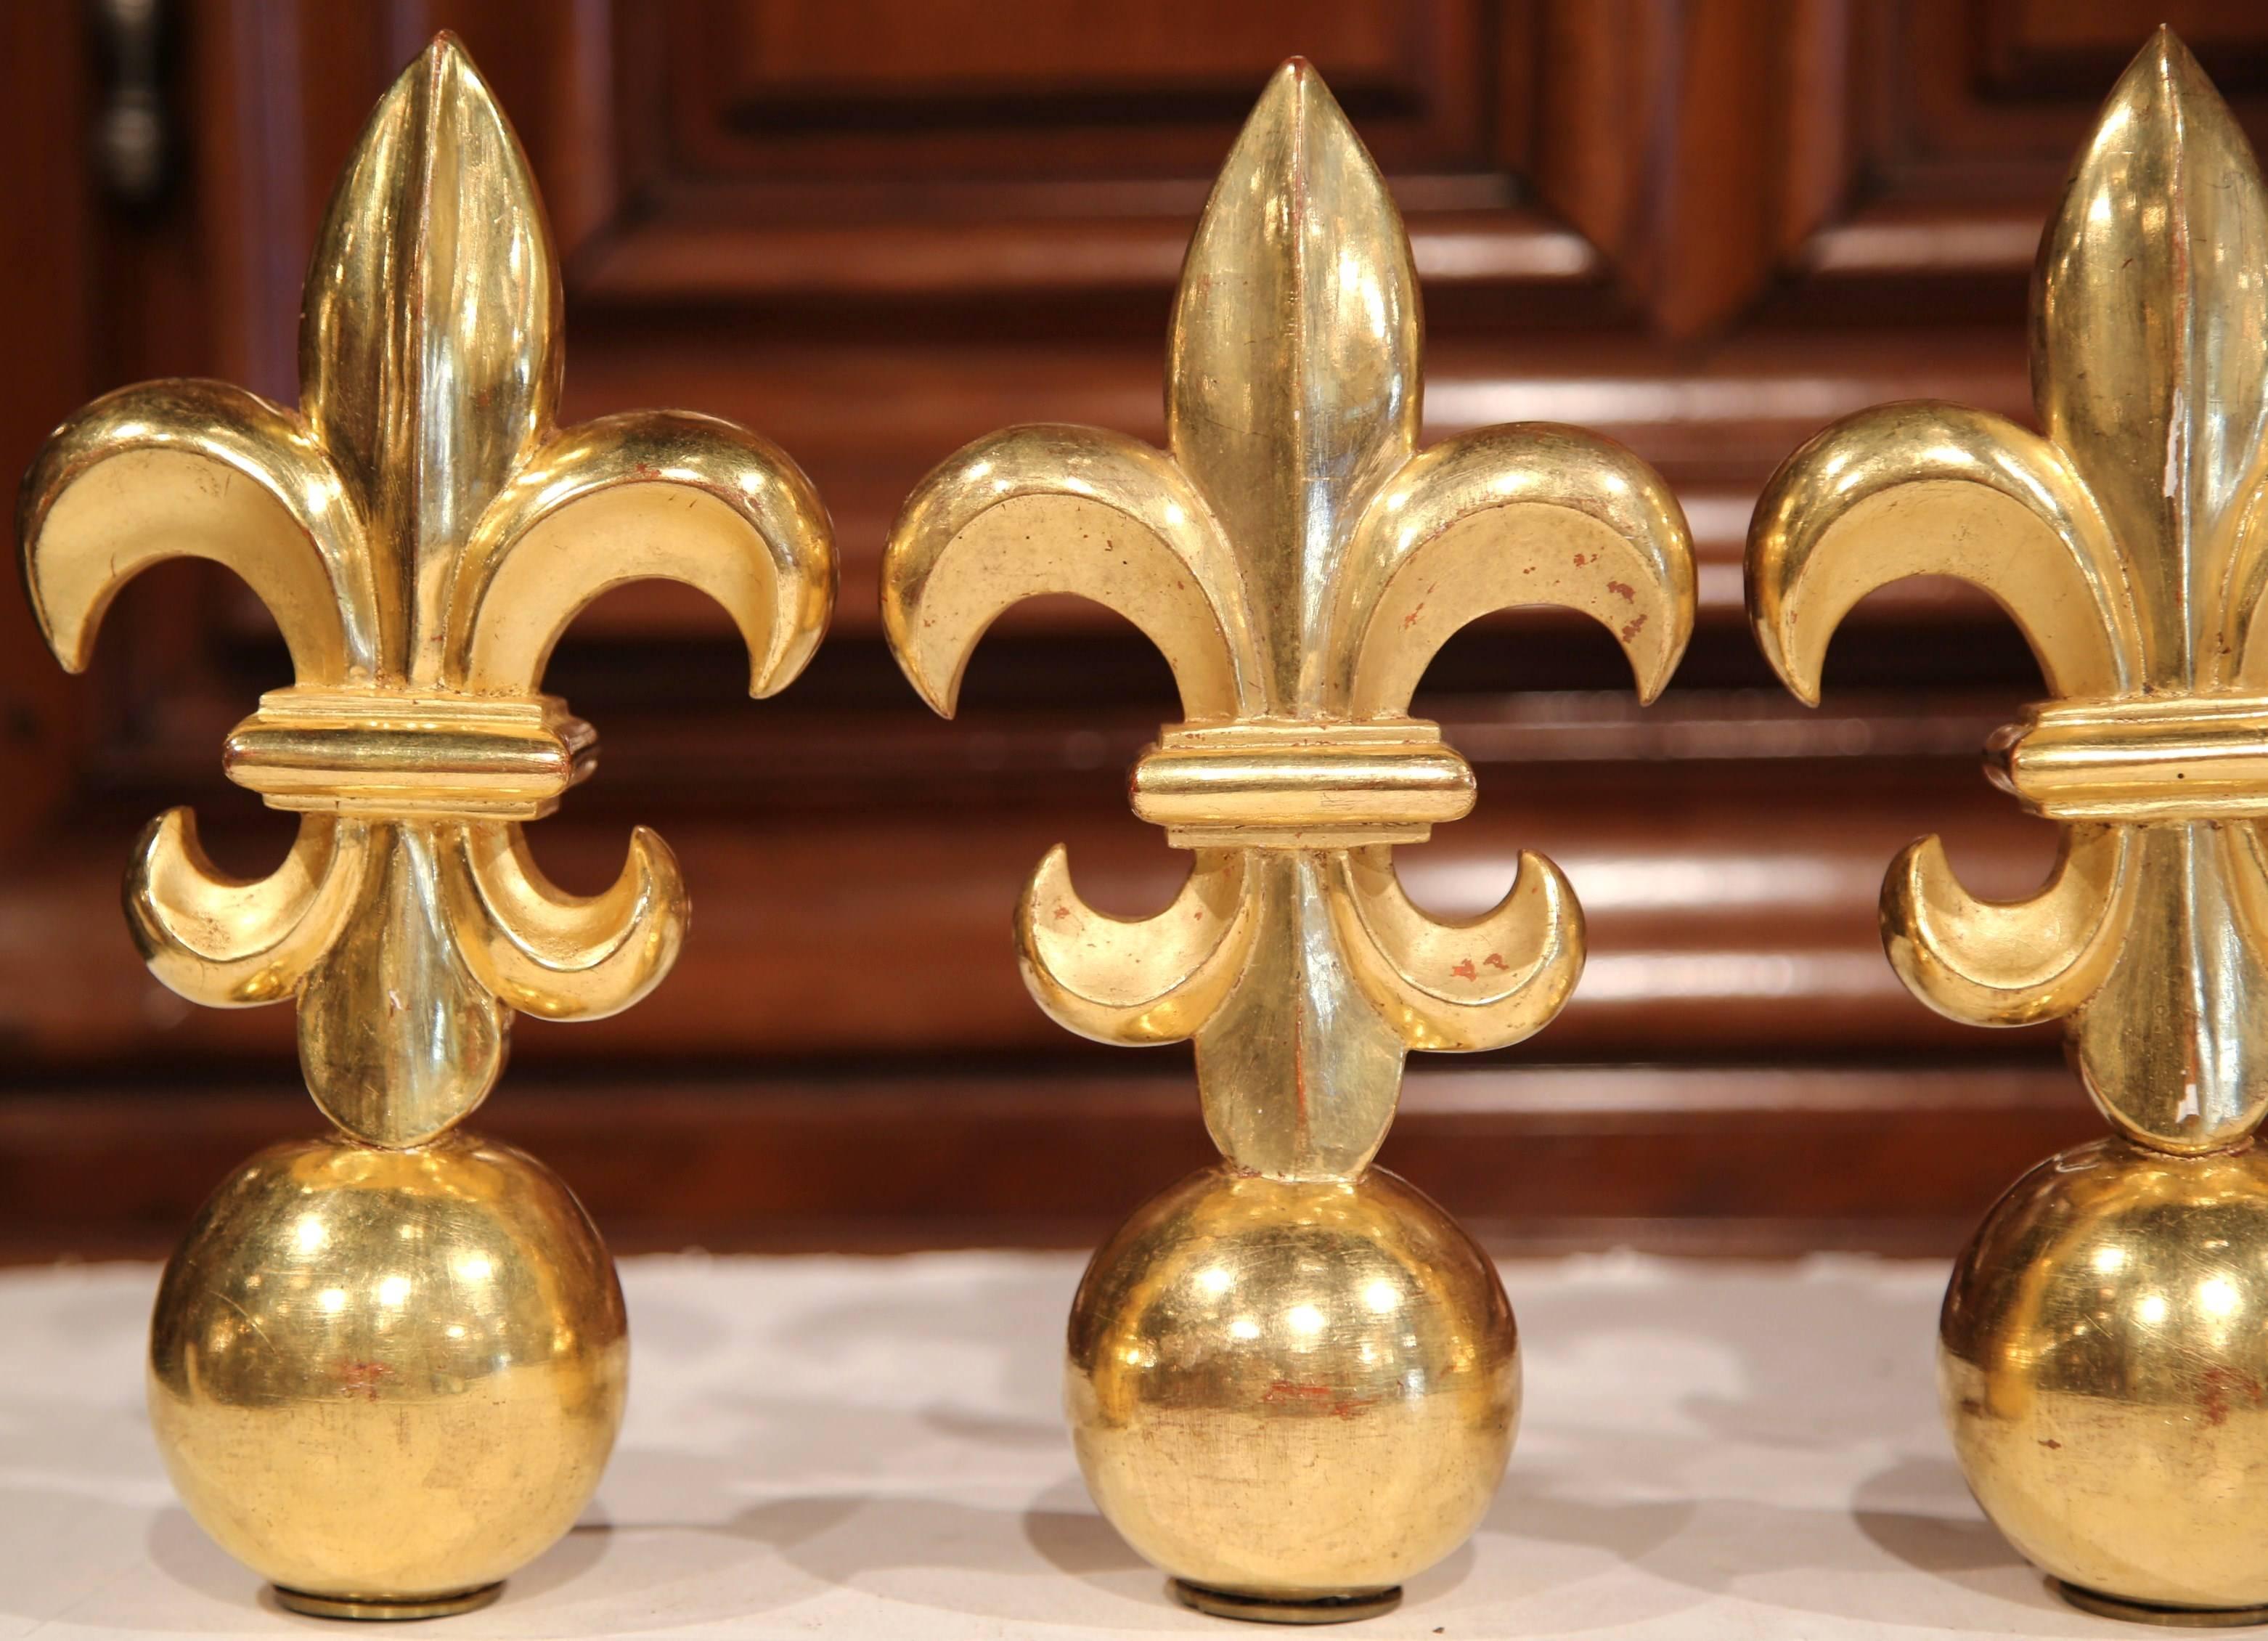 Decorate your home with this beautiful set of four carved wood brackets. Crafted in France, circa 1900, the wooden brackets are in the shape of fleur-de-lys. A Classic symbol of France that has ties to the French monarchy. The pieces are all in